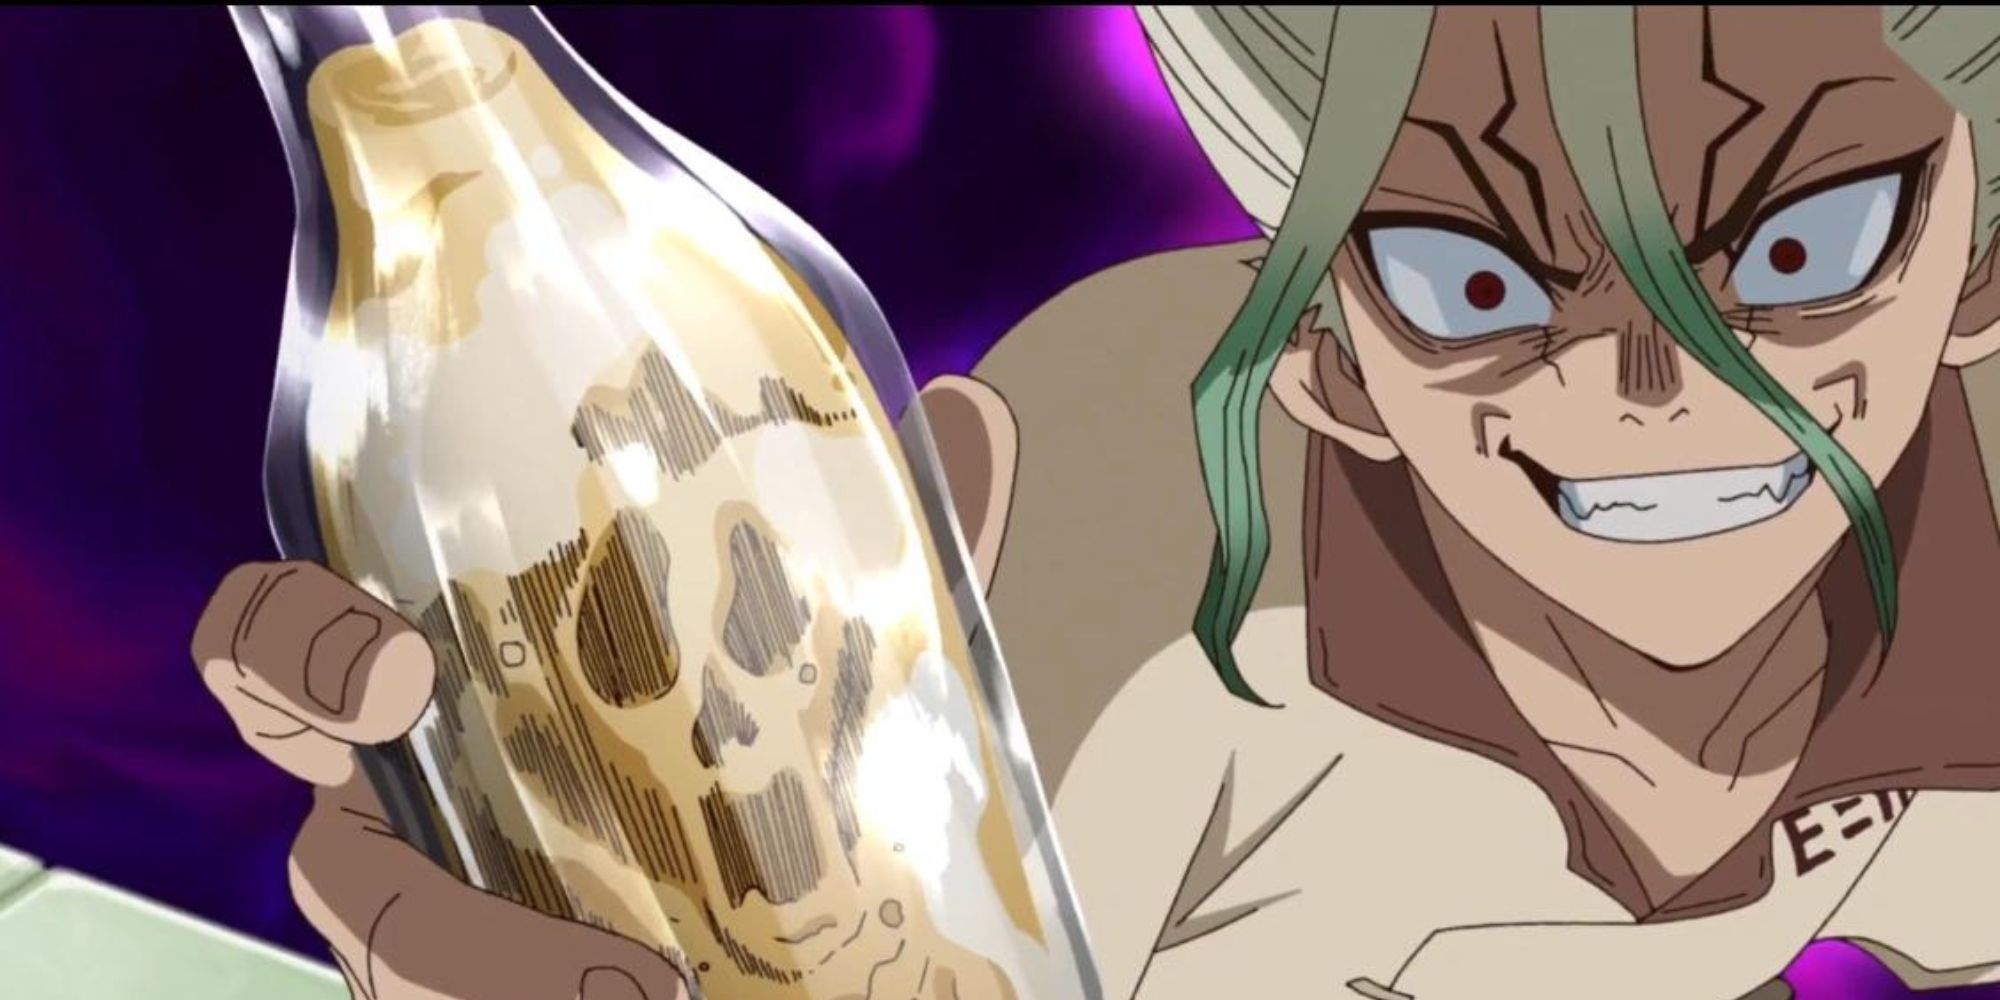 Power-up Science drink held by Senku in Dr. Stone